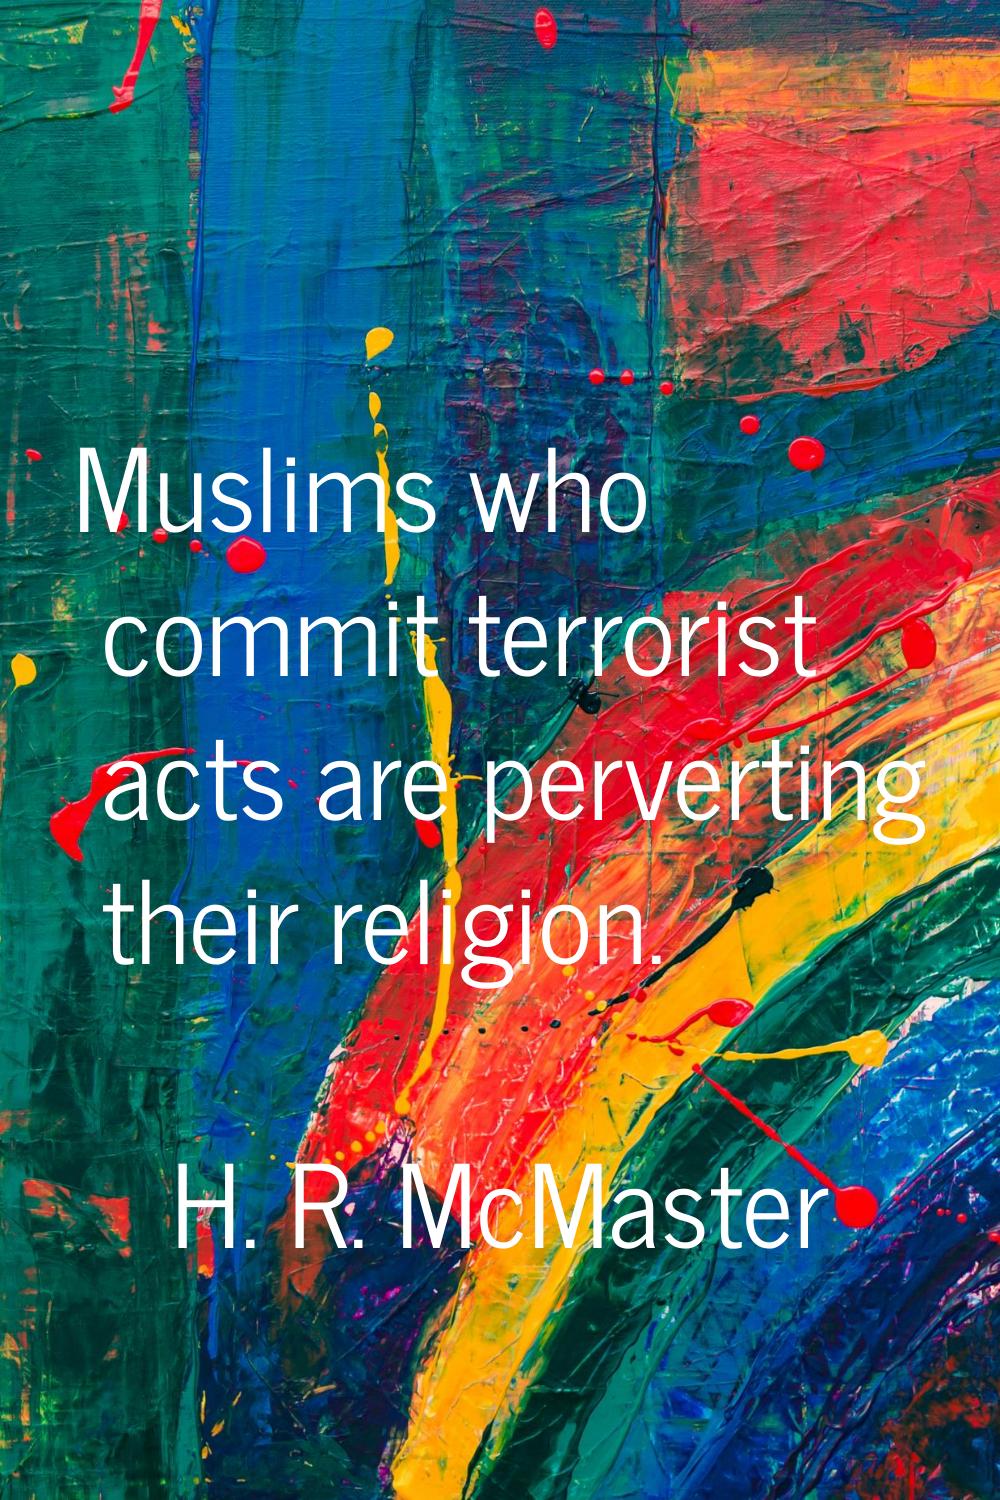 Muslims who commit terrorist acts are perverting their religion.